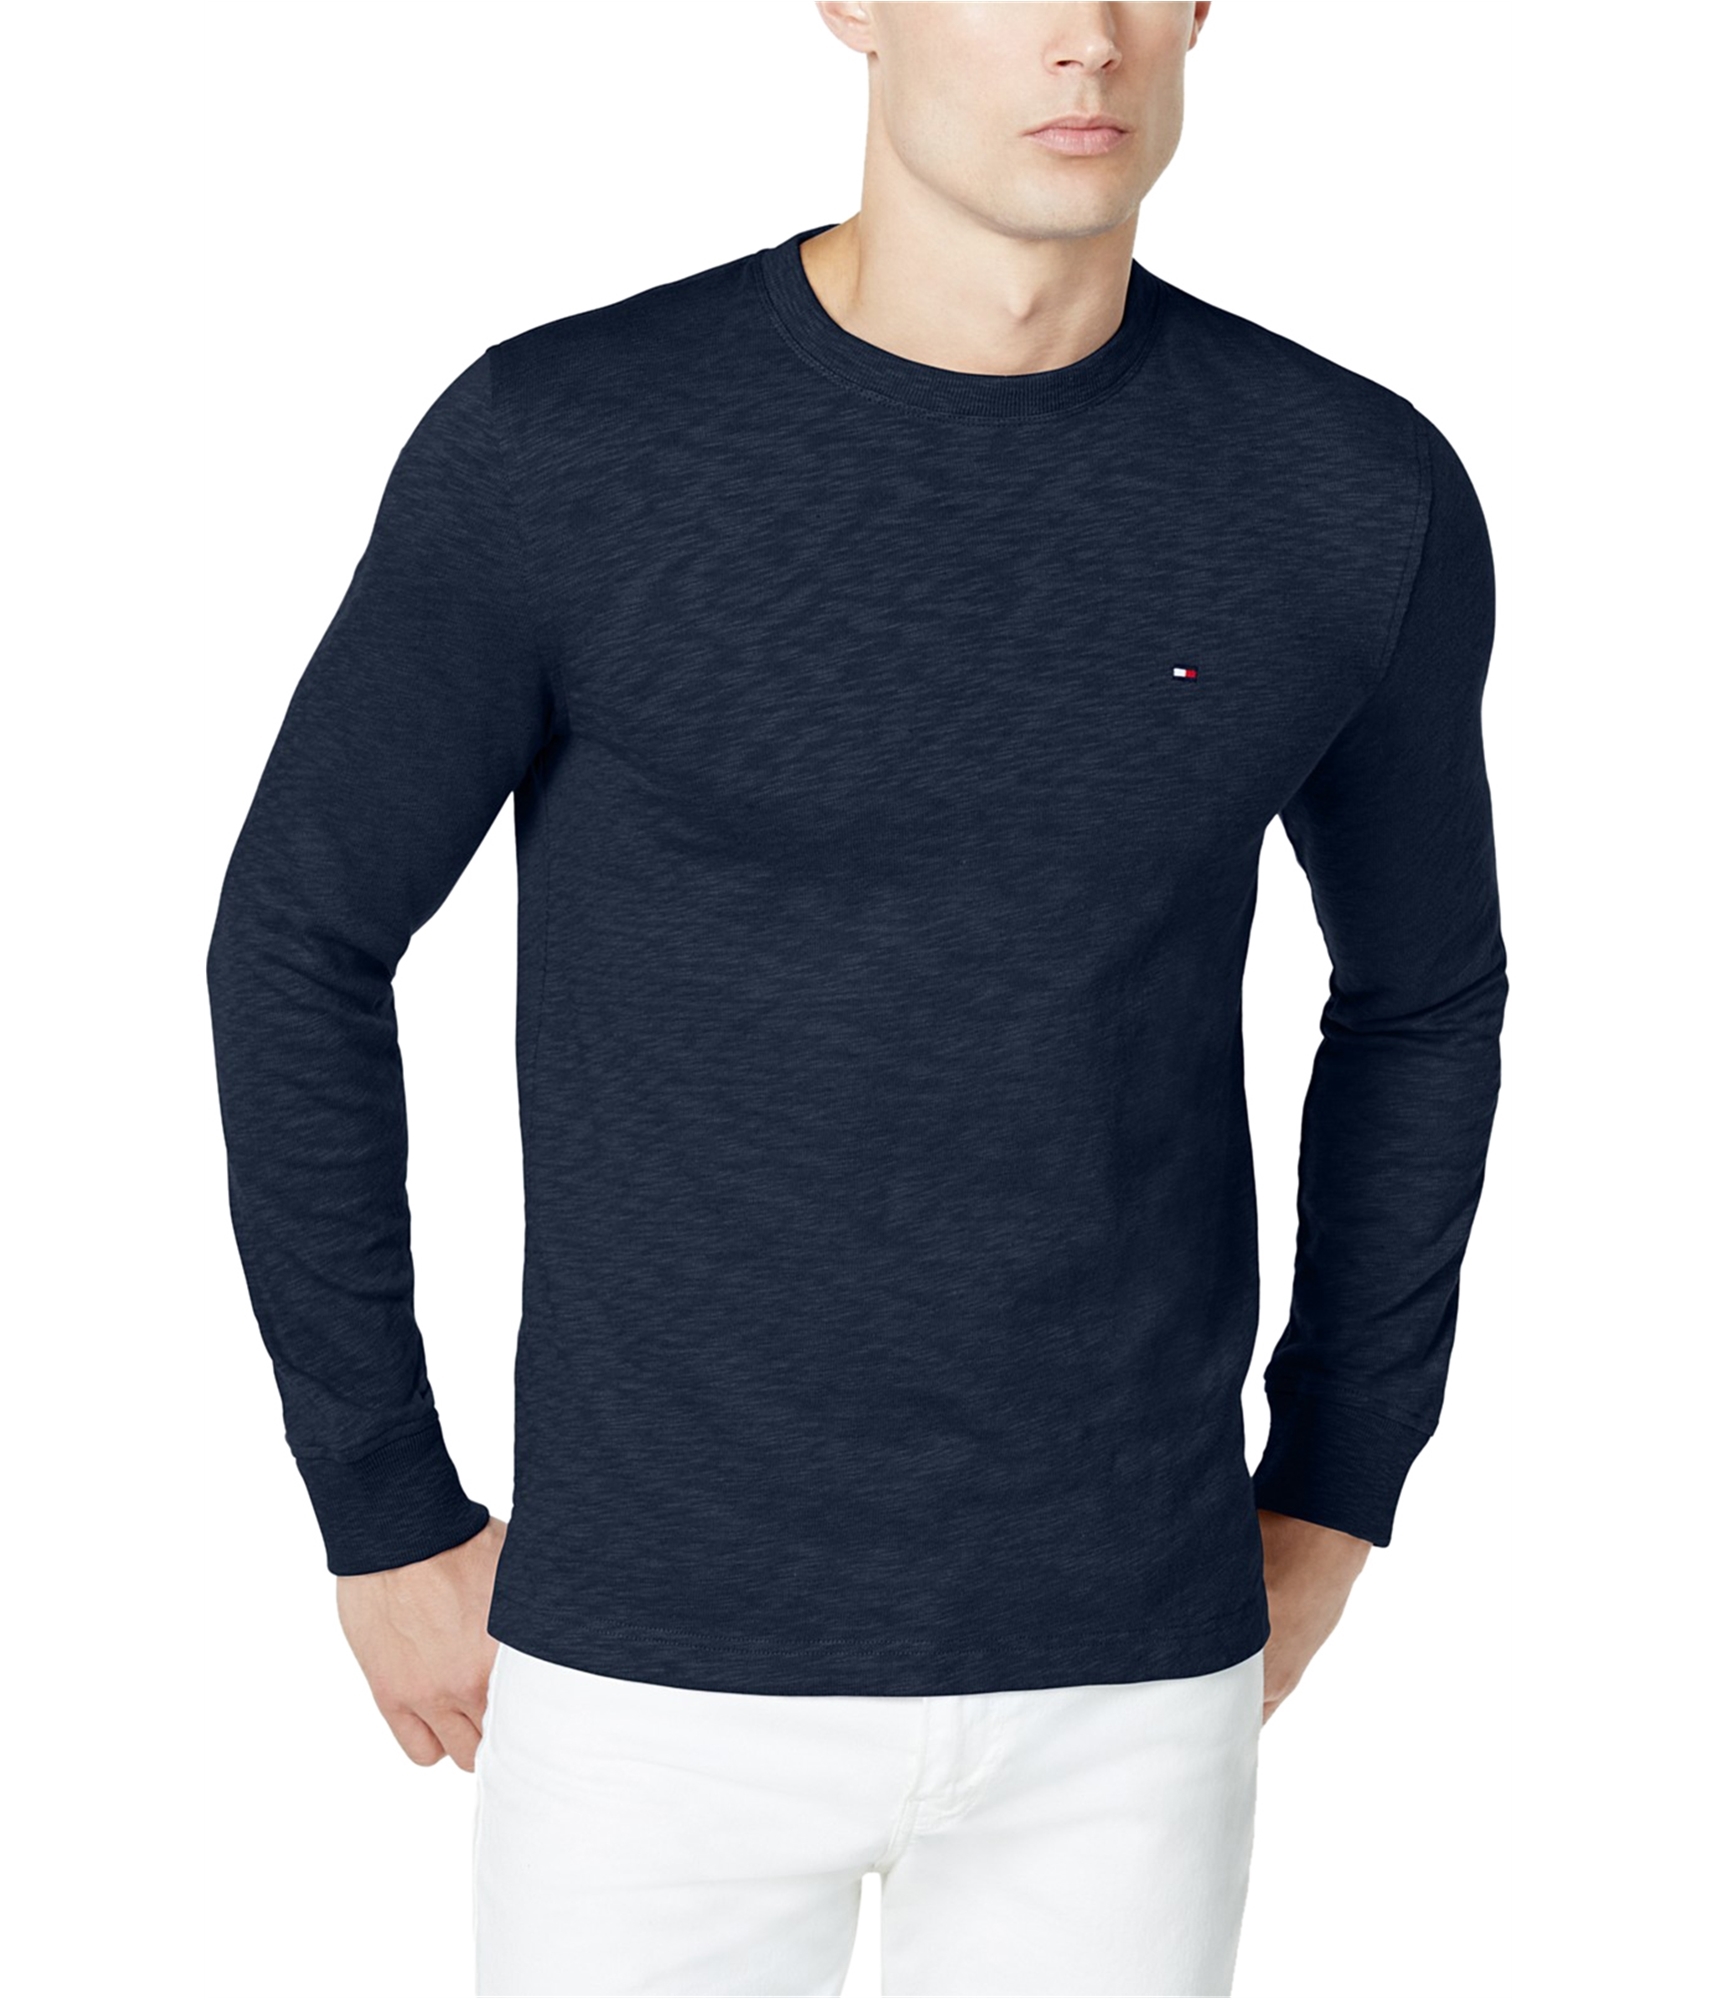 Buy a Mens Tommy Hilfiger Henson Online | TagsWeekly.com